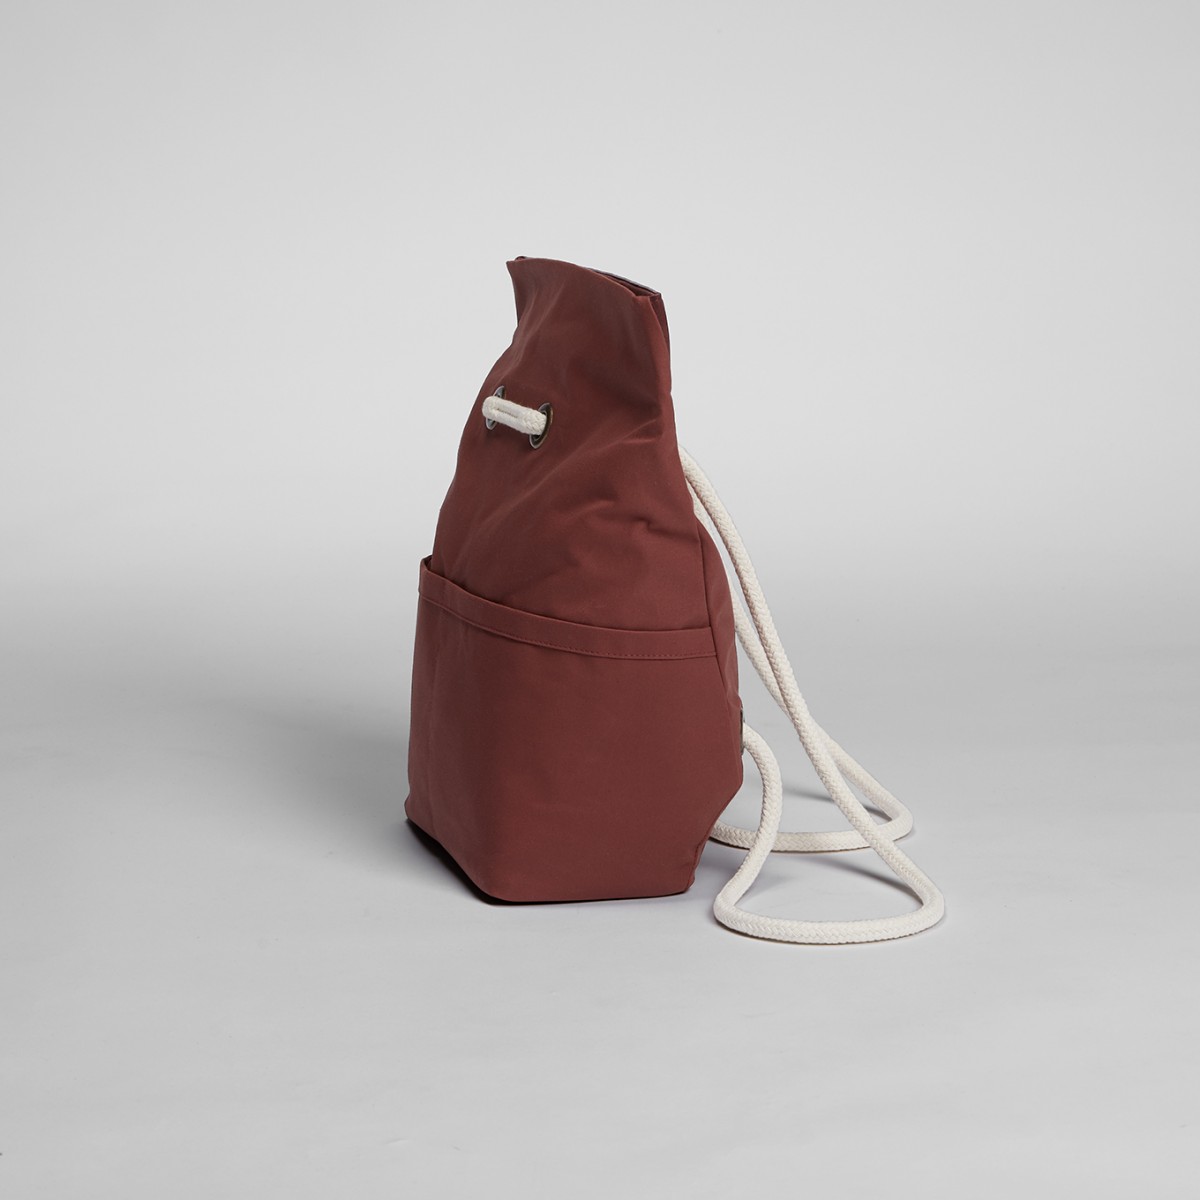 Dual Backpack Small
Berry